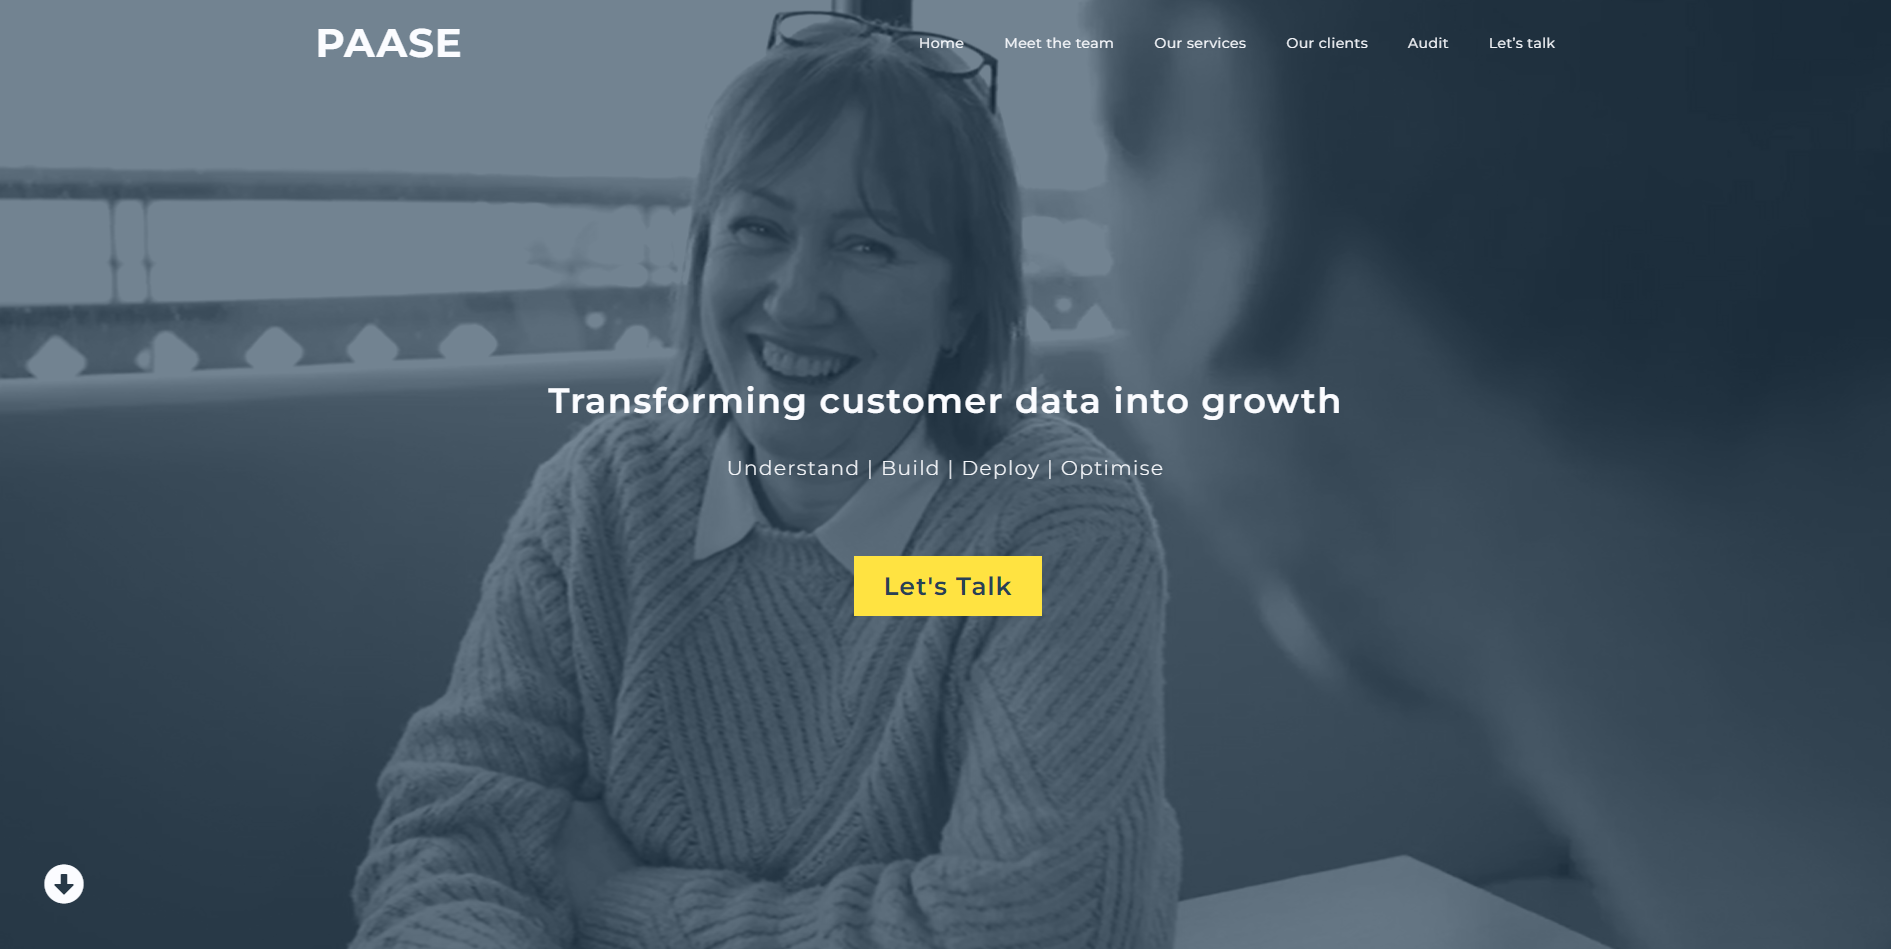 paase digital e-commerce homepage, transforming customer data into growth